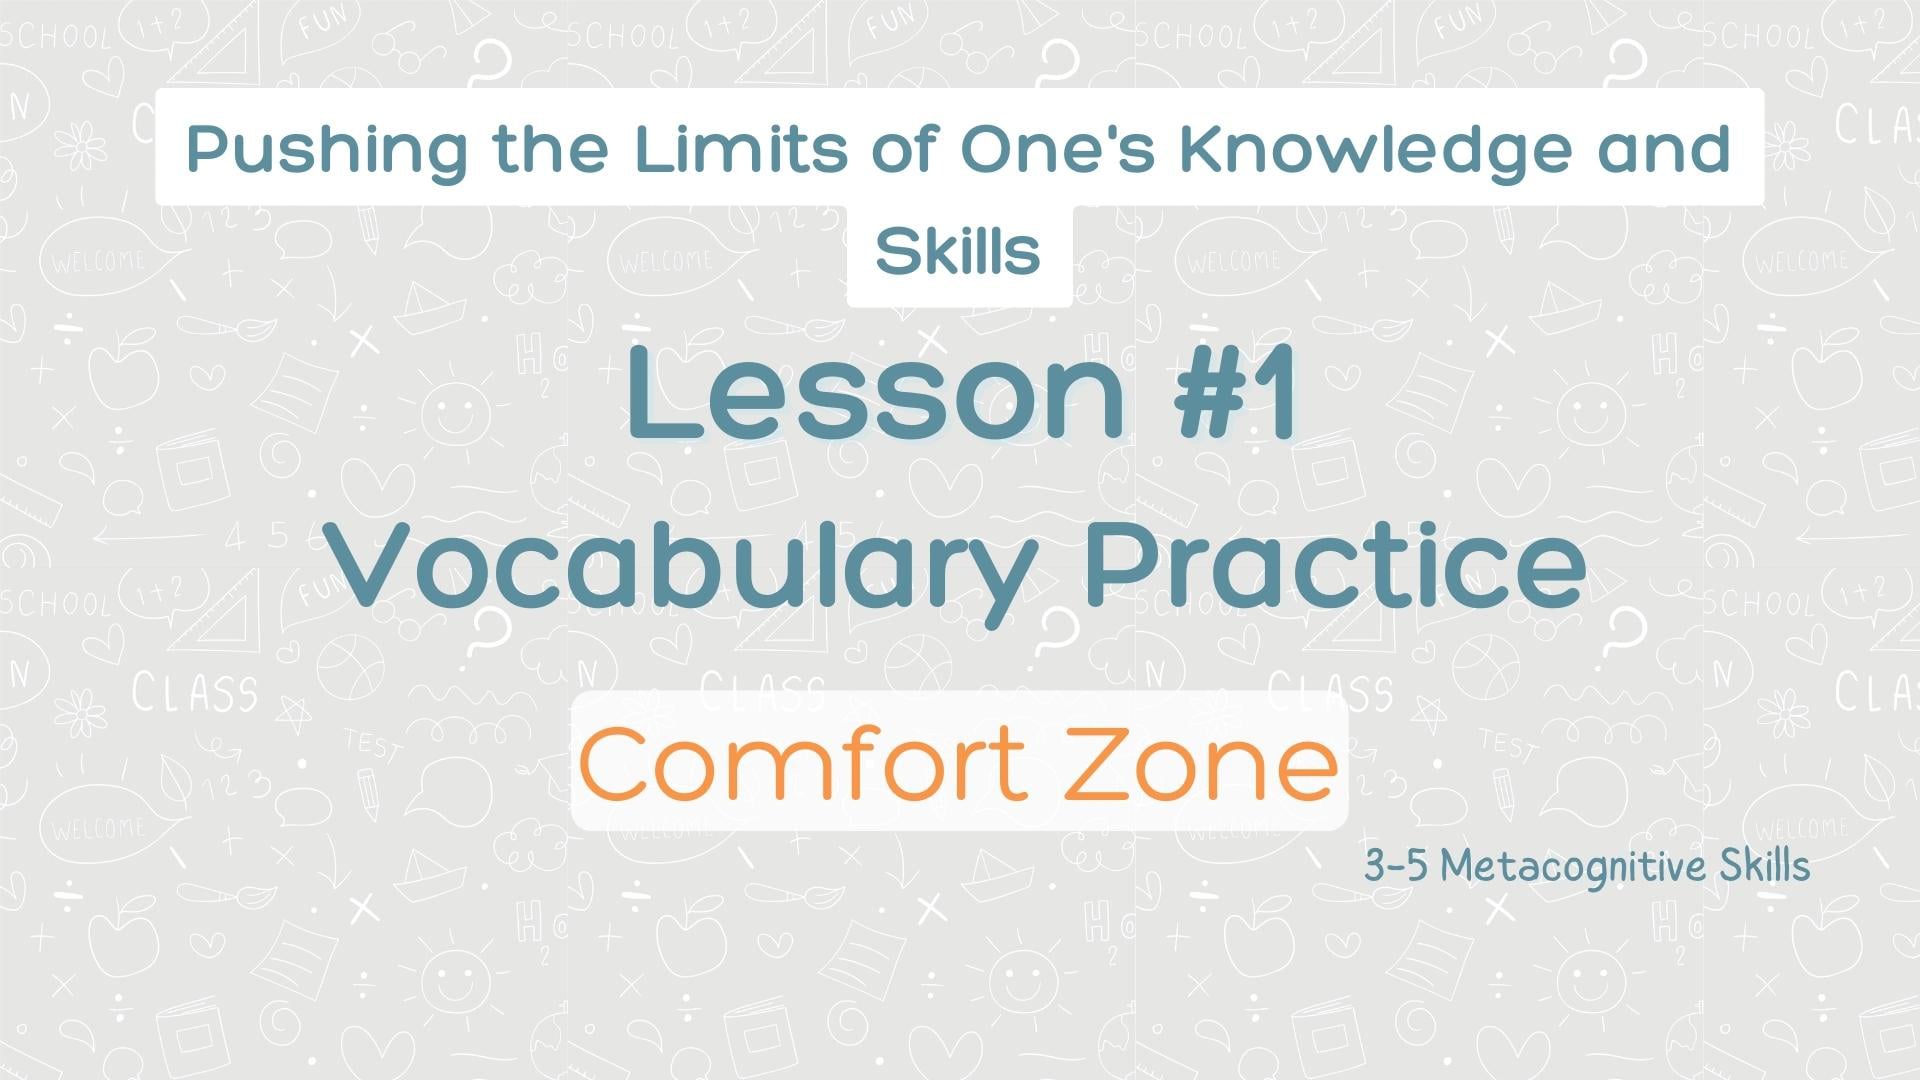 Lesson #1 Vocabulary Practice: Comfort Zone video thumbnail